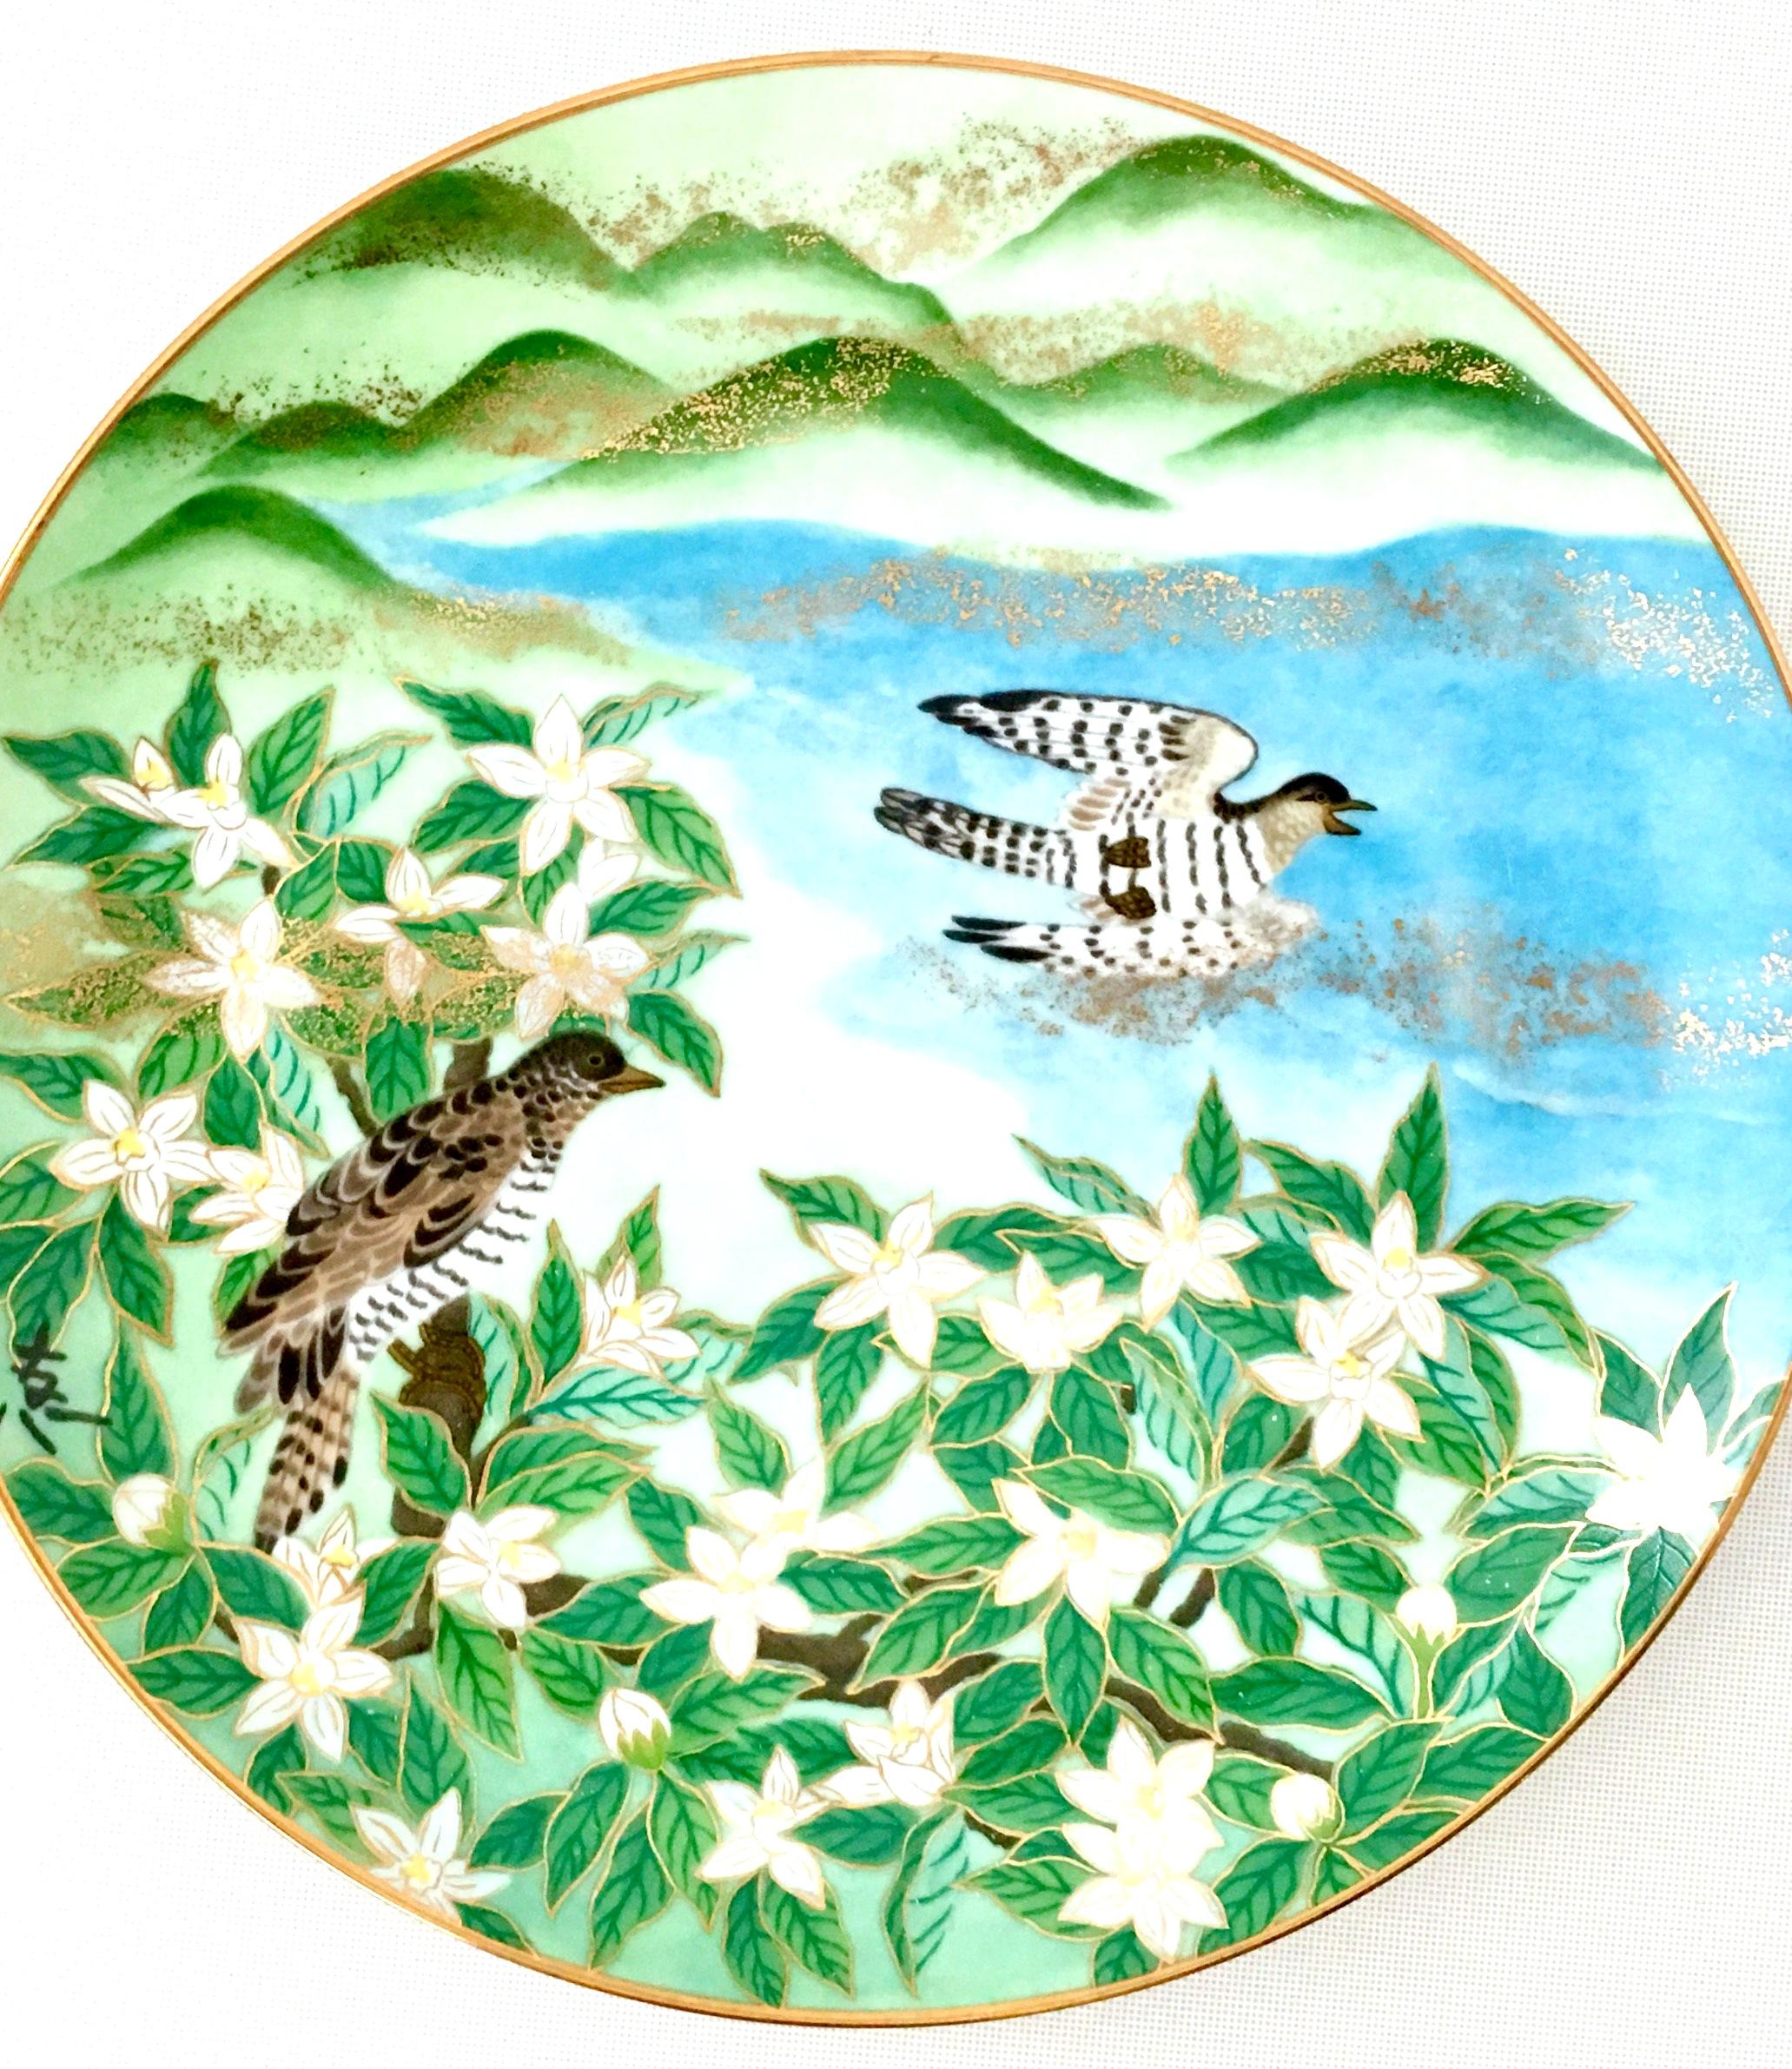 Enamel 1986 Japanese Limited Edition Hand-Painted Porcelain Plates Set Of 4 For Sale